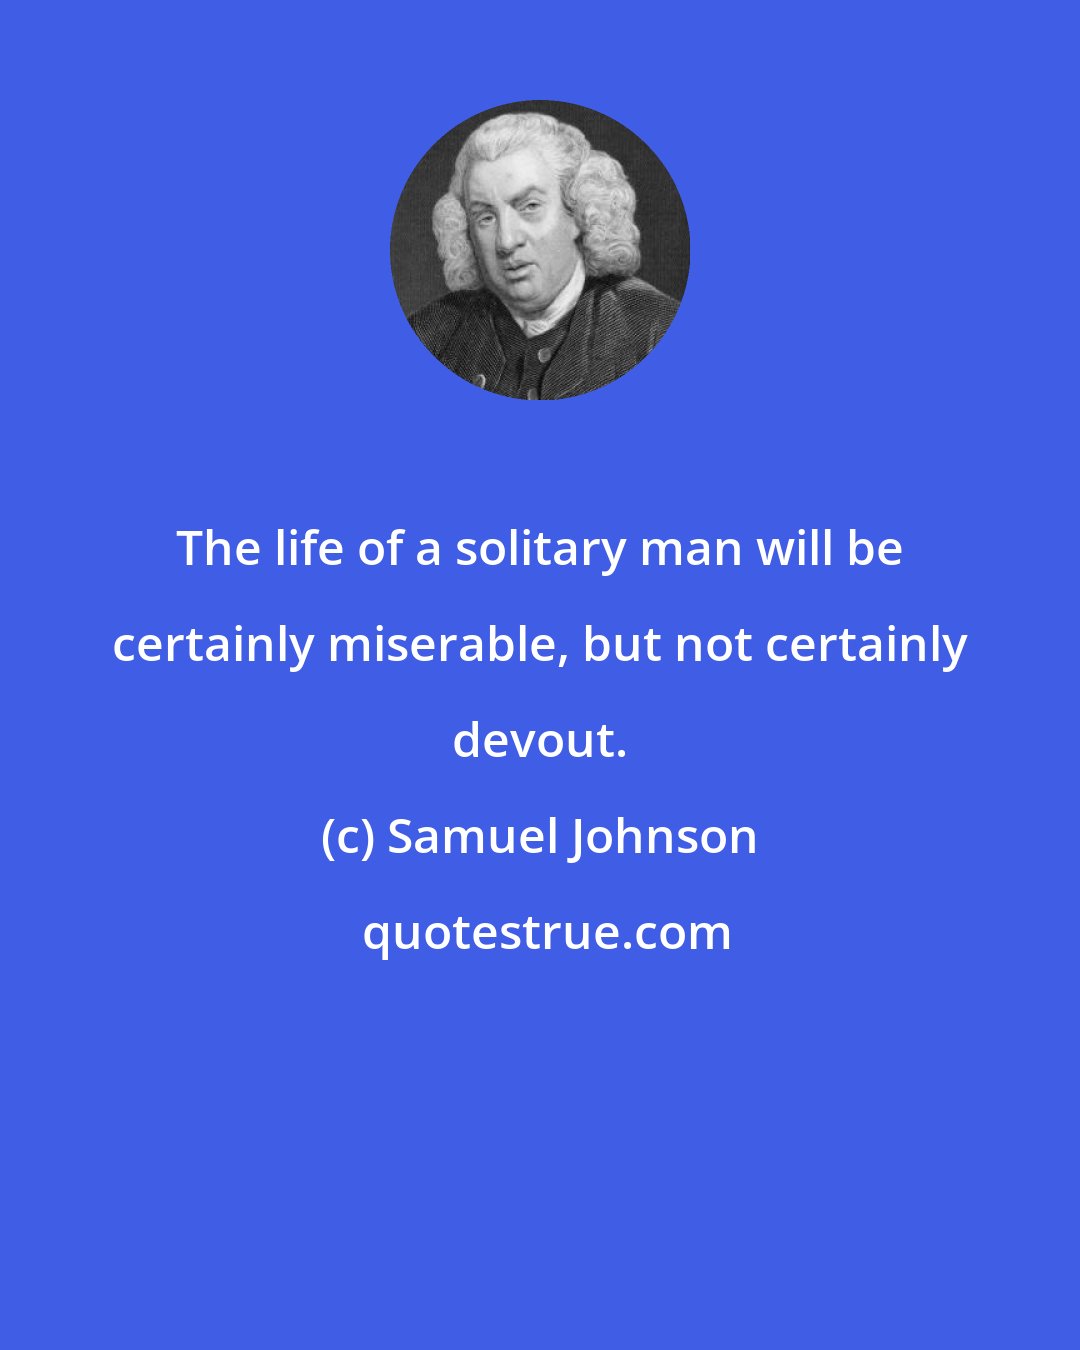 Samuel Johnson: The life of a solitary man will be certainly miserable, but not certainly devout.